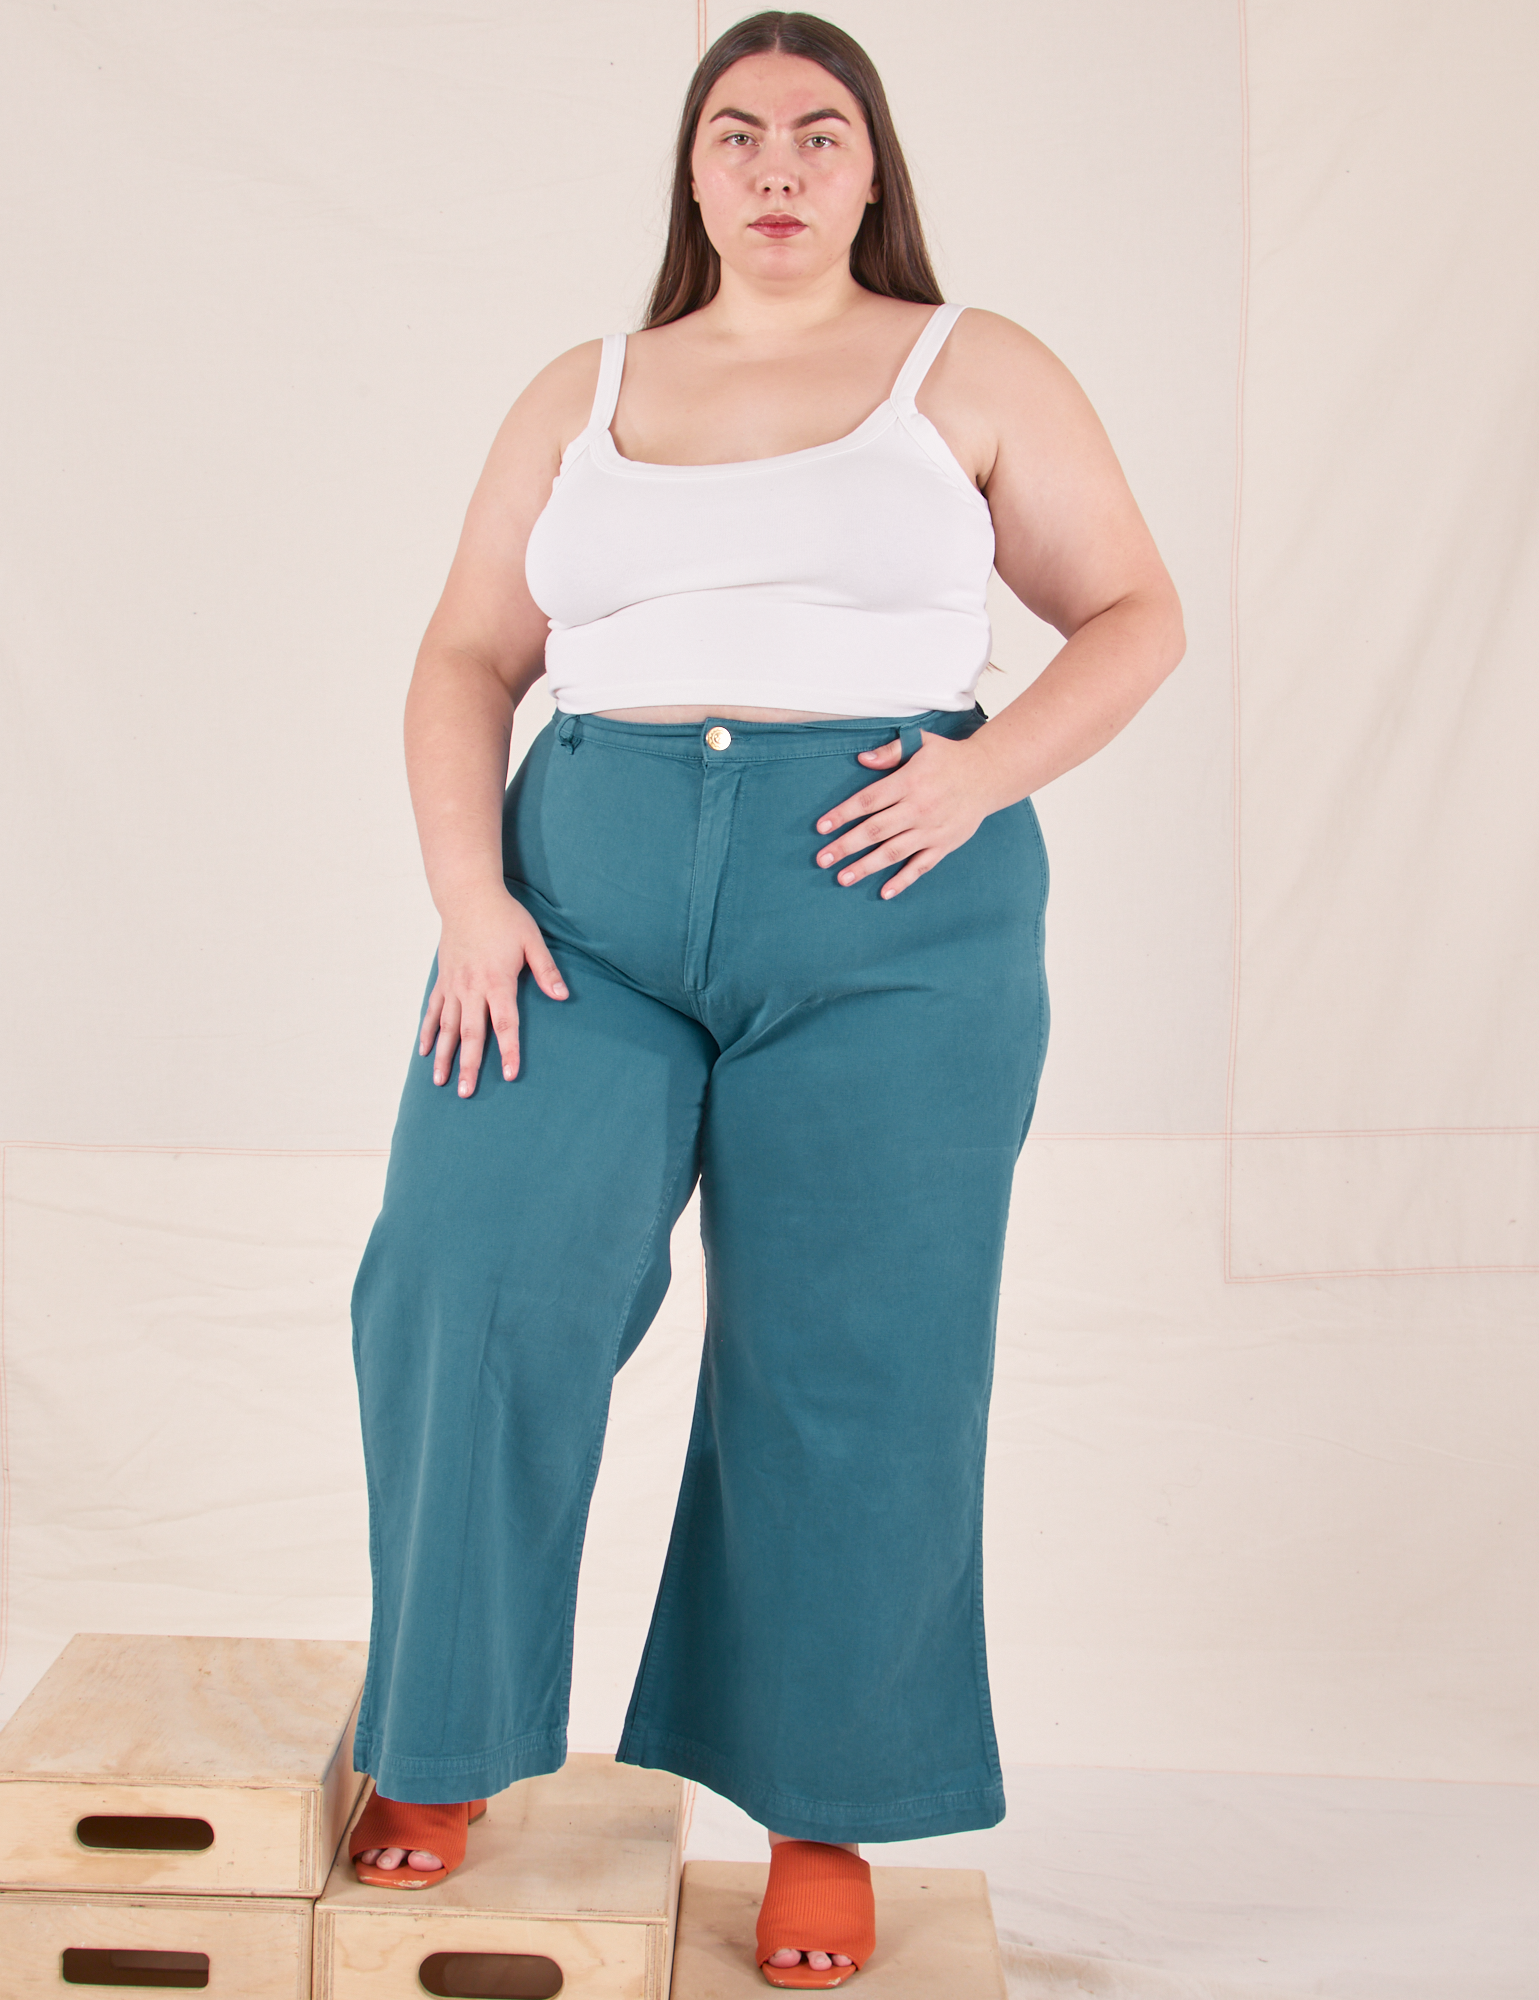 Marielena is 5&#39;8&quot; and wearing 2XL Bell Bottoms in Marine Blue paired with vintage off-white Cami